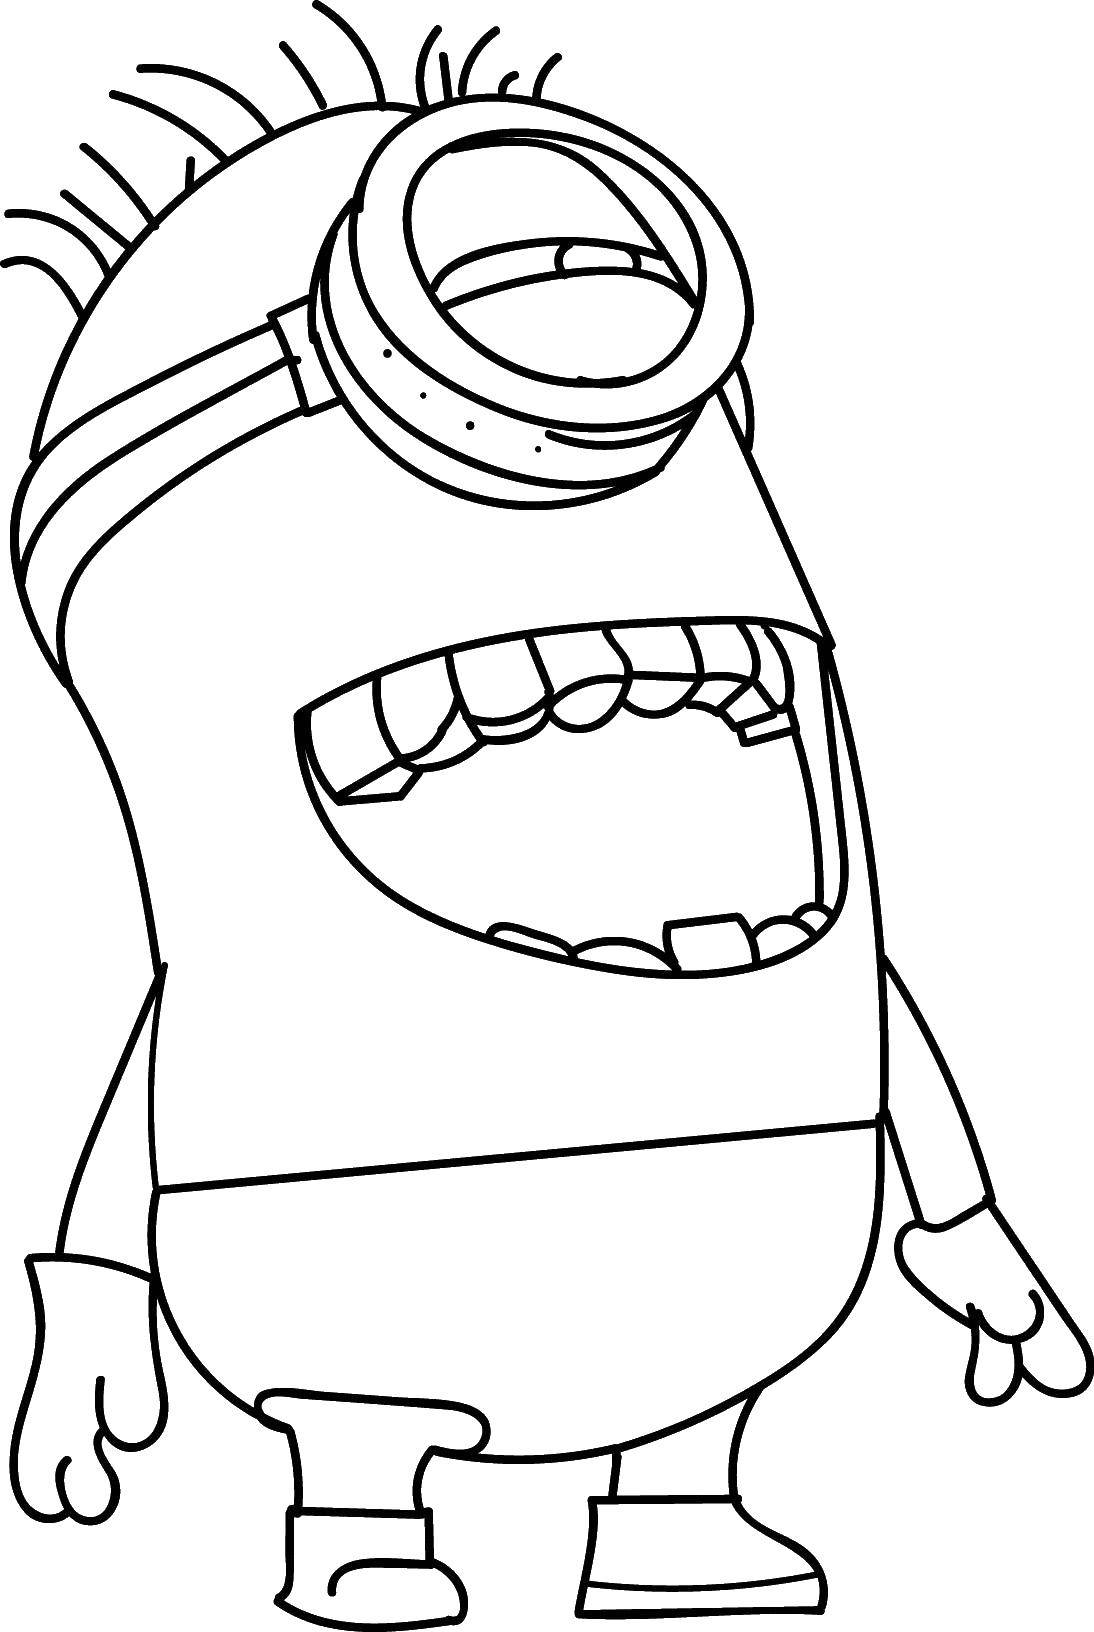 Coloring Minion Carl. Category the minions. Tags:  the minions.